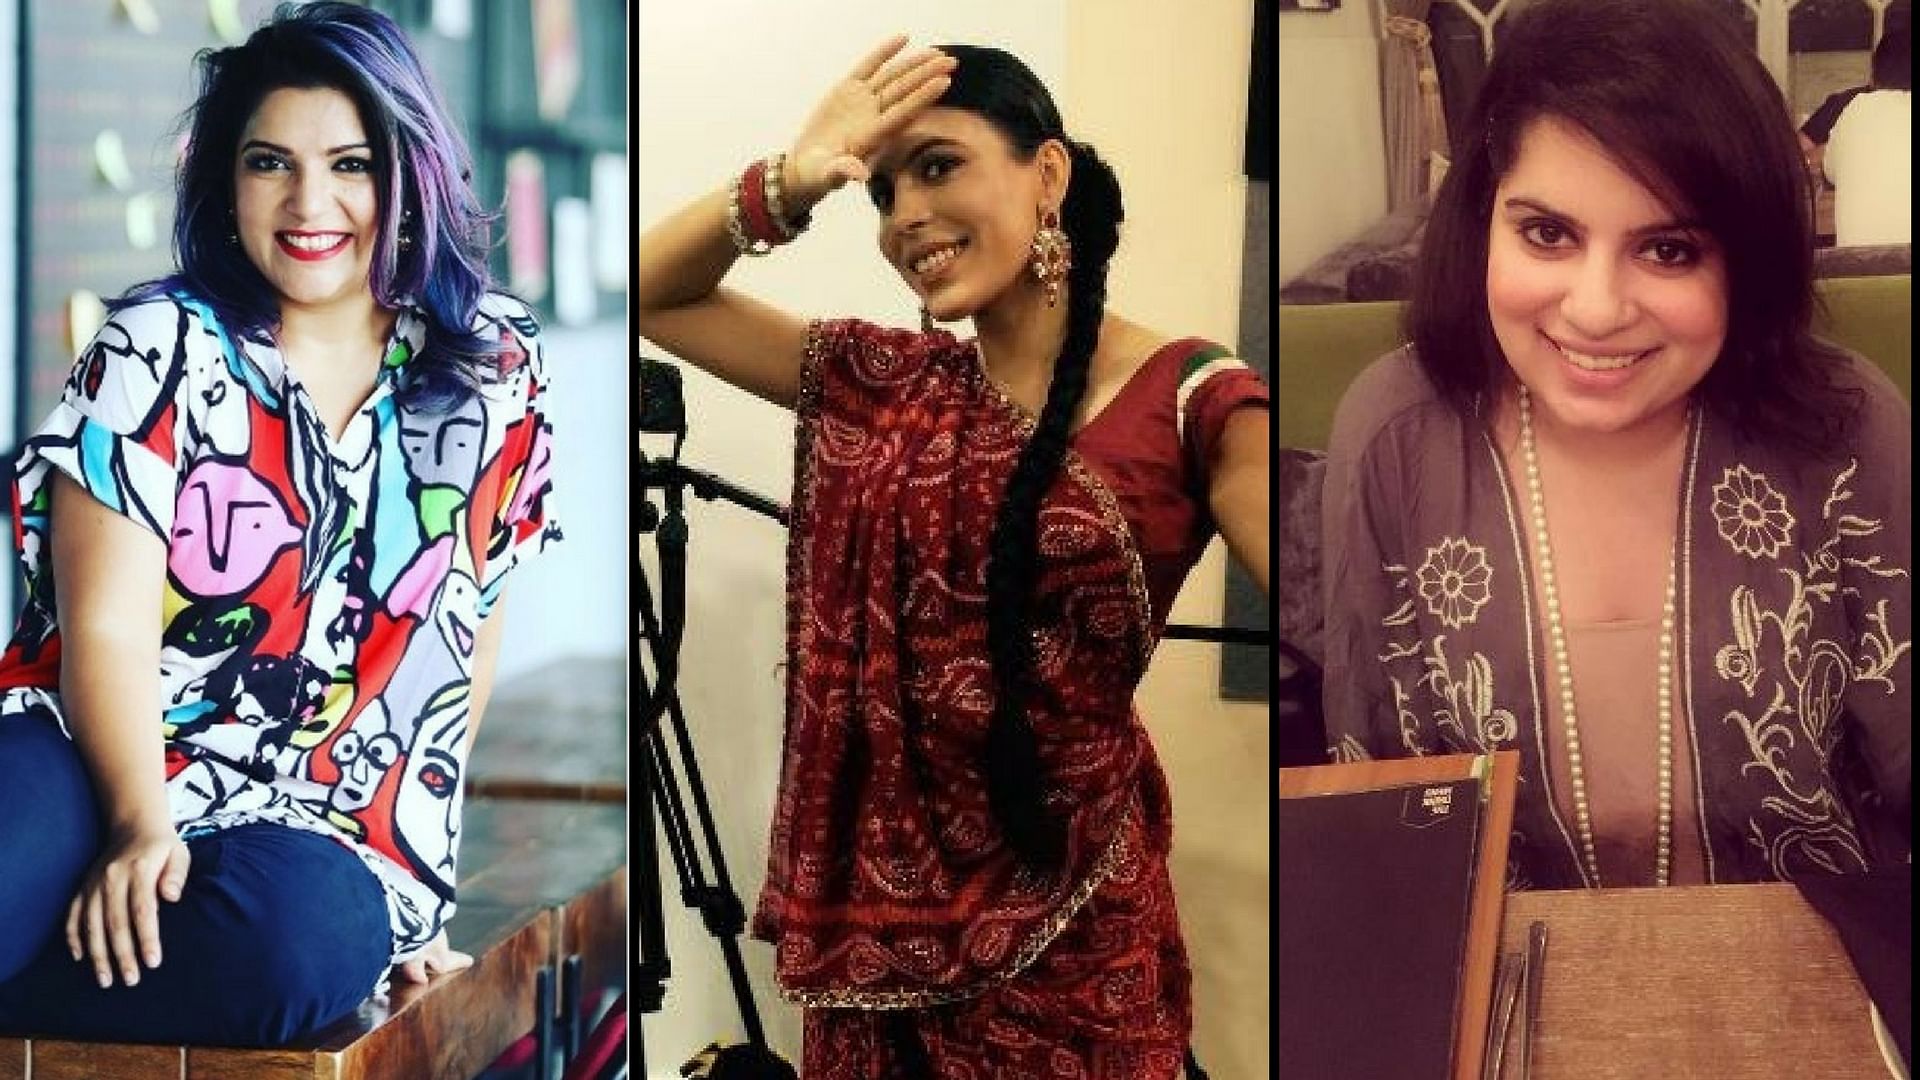 Here’s what Aditi Mittal, Anuradha Menon and Mallika Dua recommend. (Photo: Altered by <b>The Quint</b>)